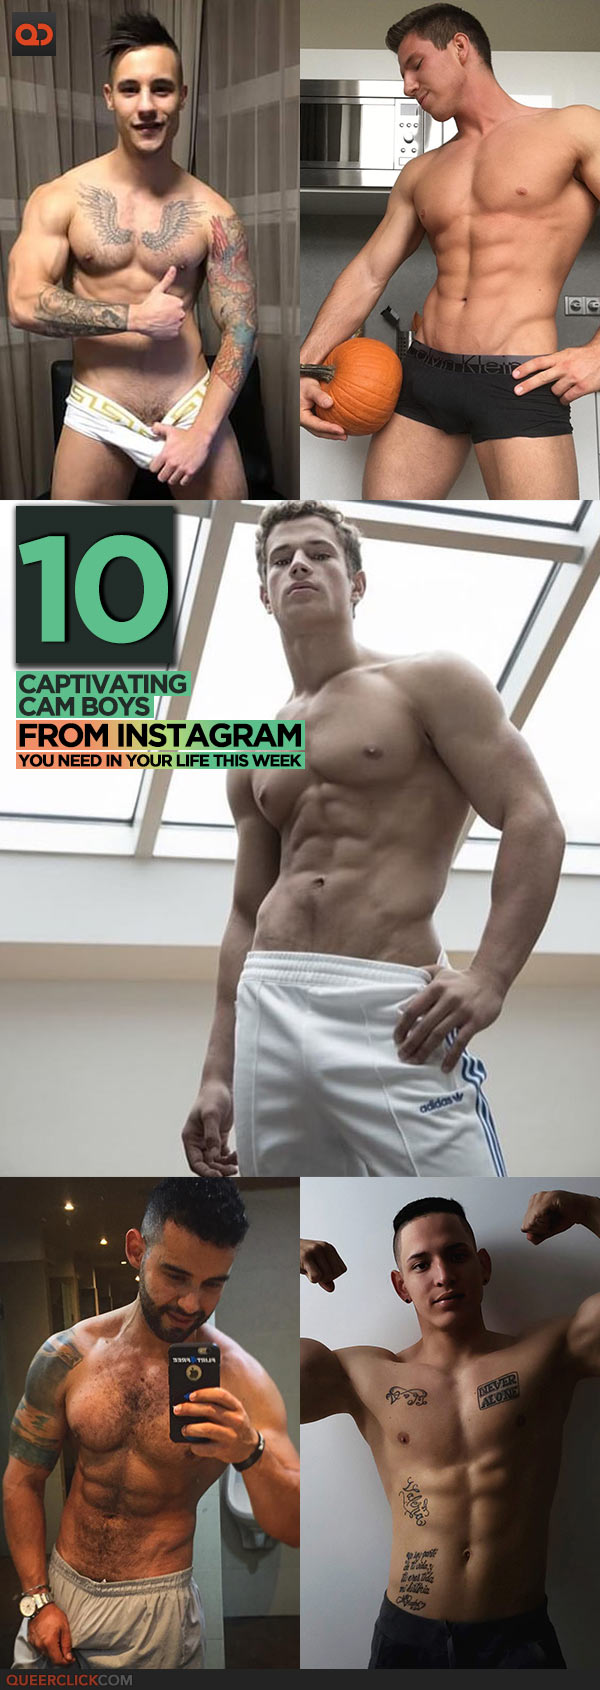 10 Captivating Cam Boys From Instagram You Need In Your Life This Week!